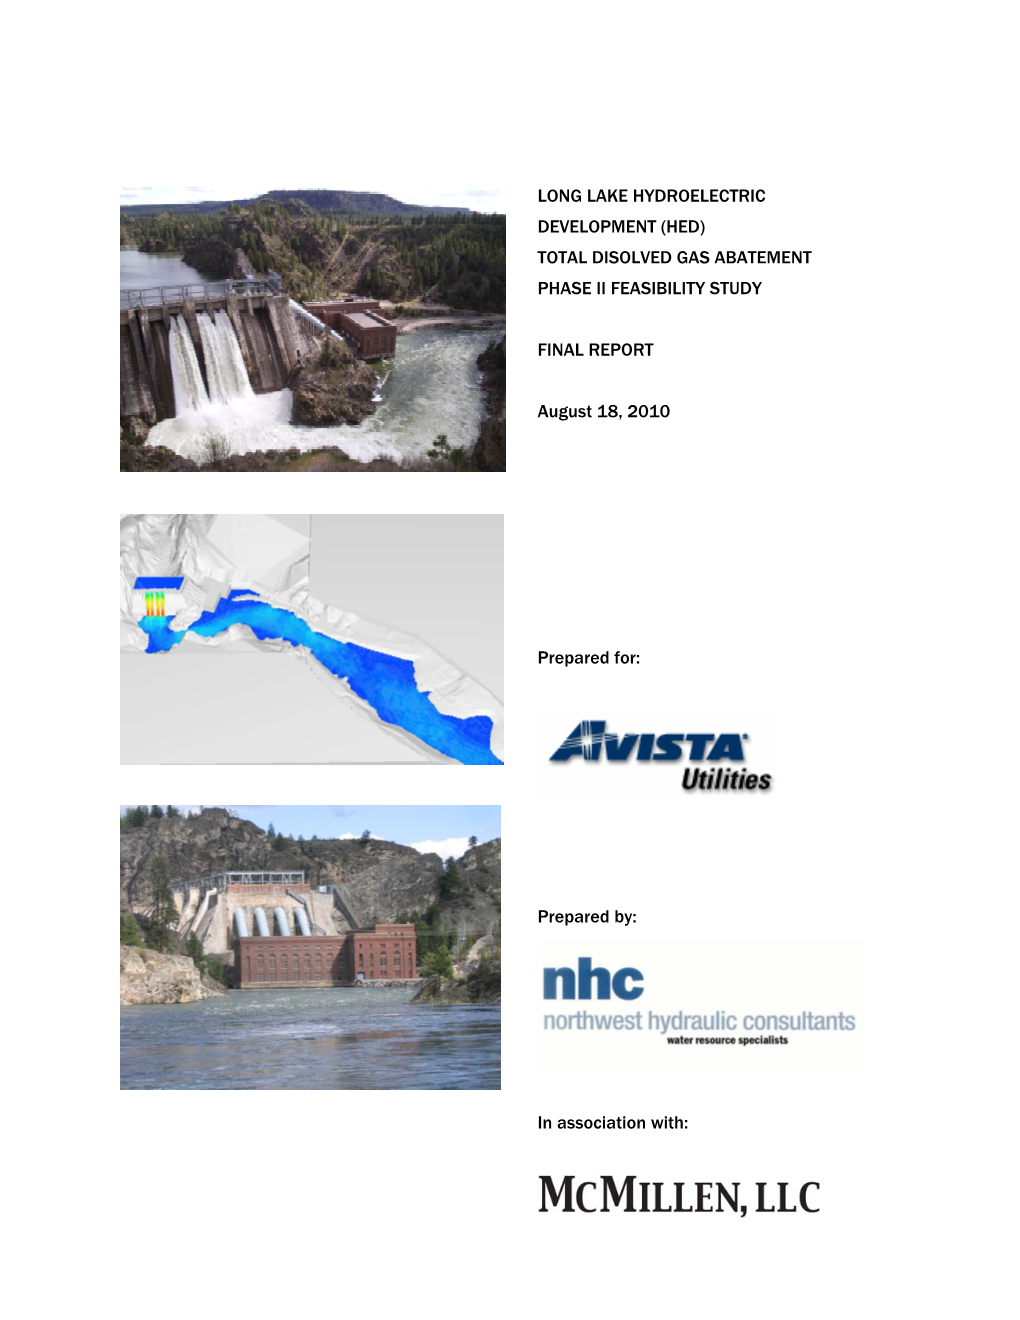 Long Lake Hydroelectric Development (Hed) Total Disolved Gas Abatement Phase Ii Feasibility Study